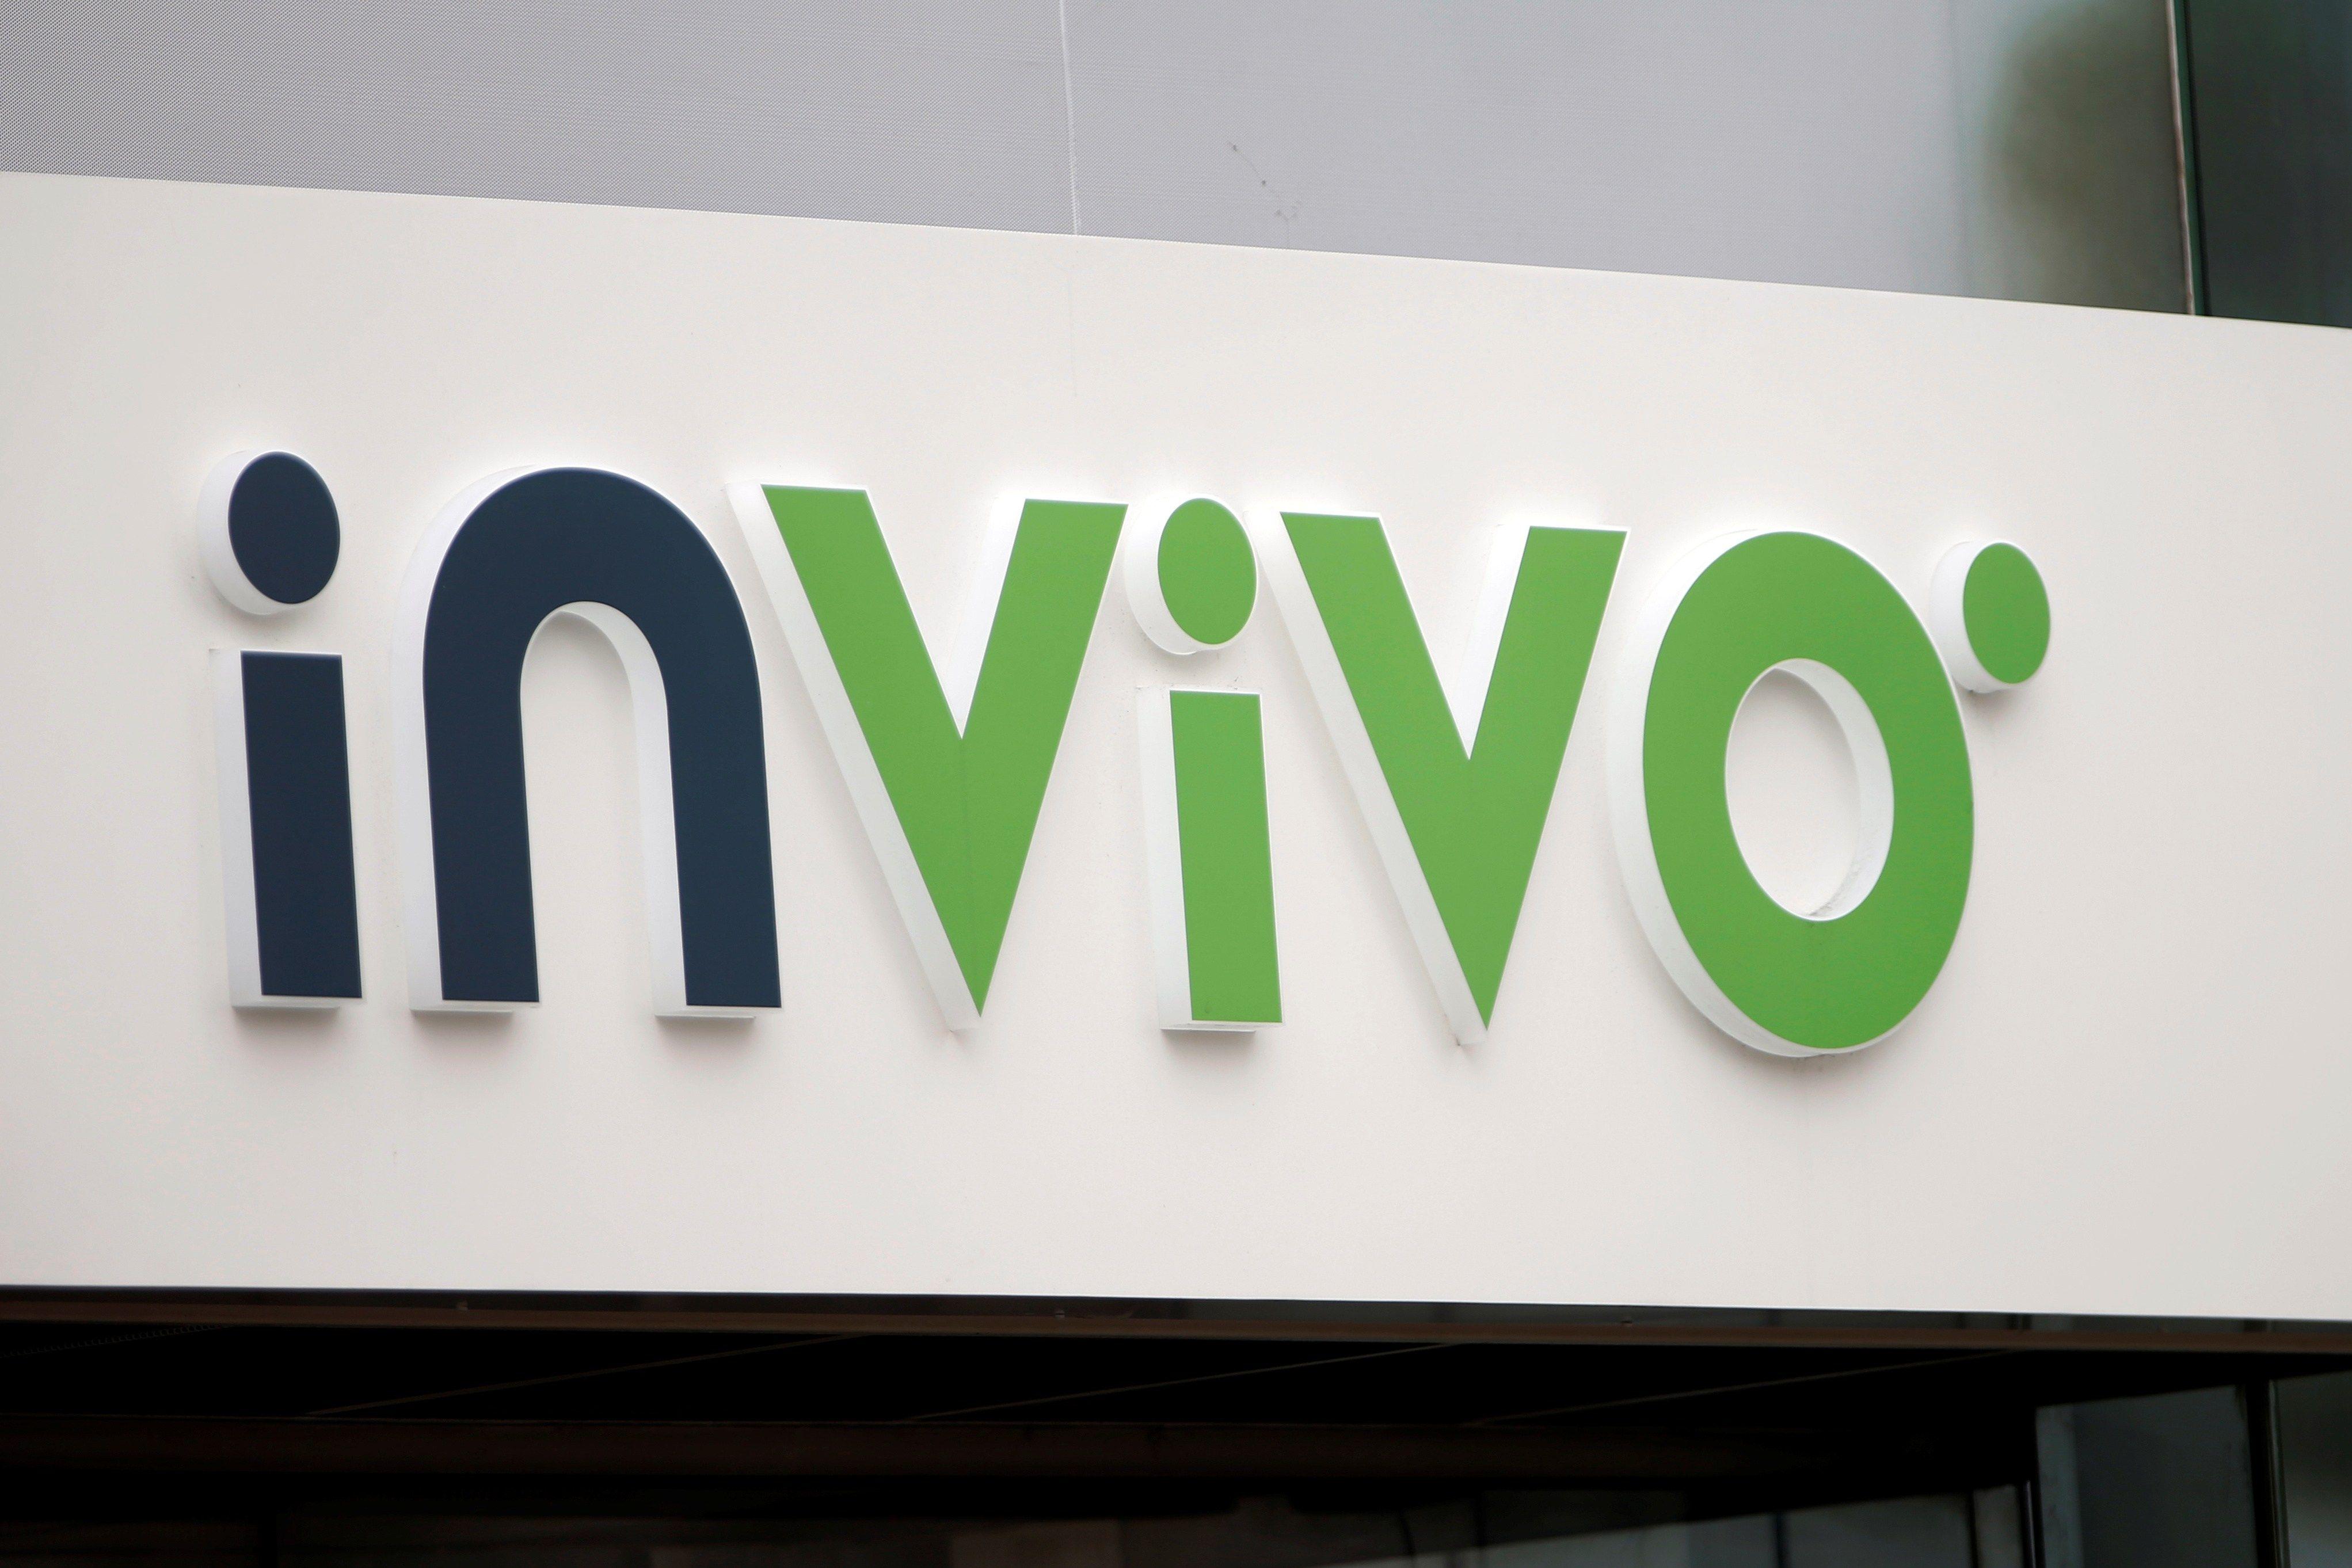 French Food Company Logo - InVivo Looks To Pesticide Free Food, French Bread For Future Growth